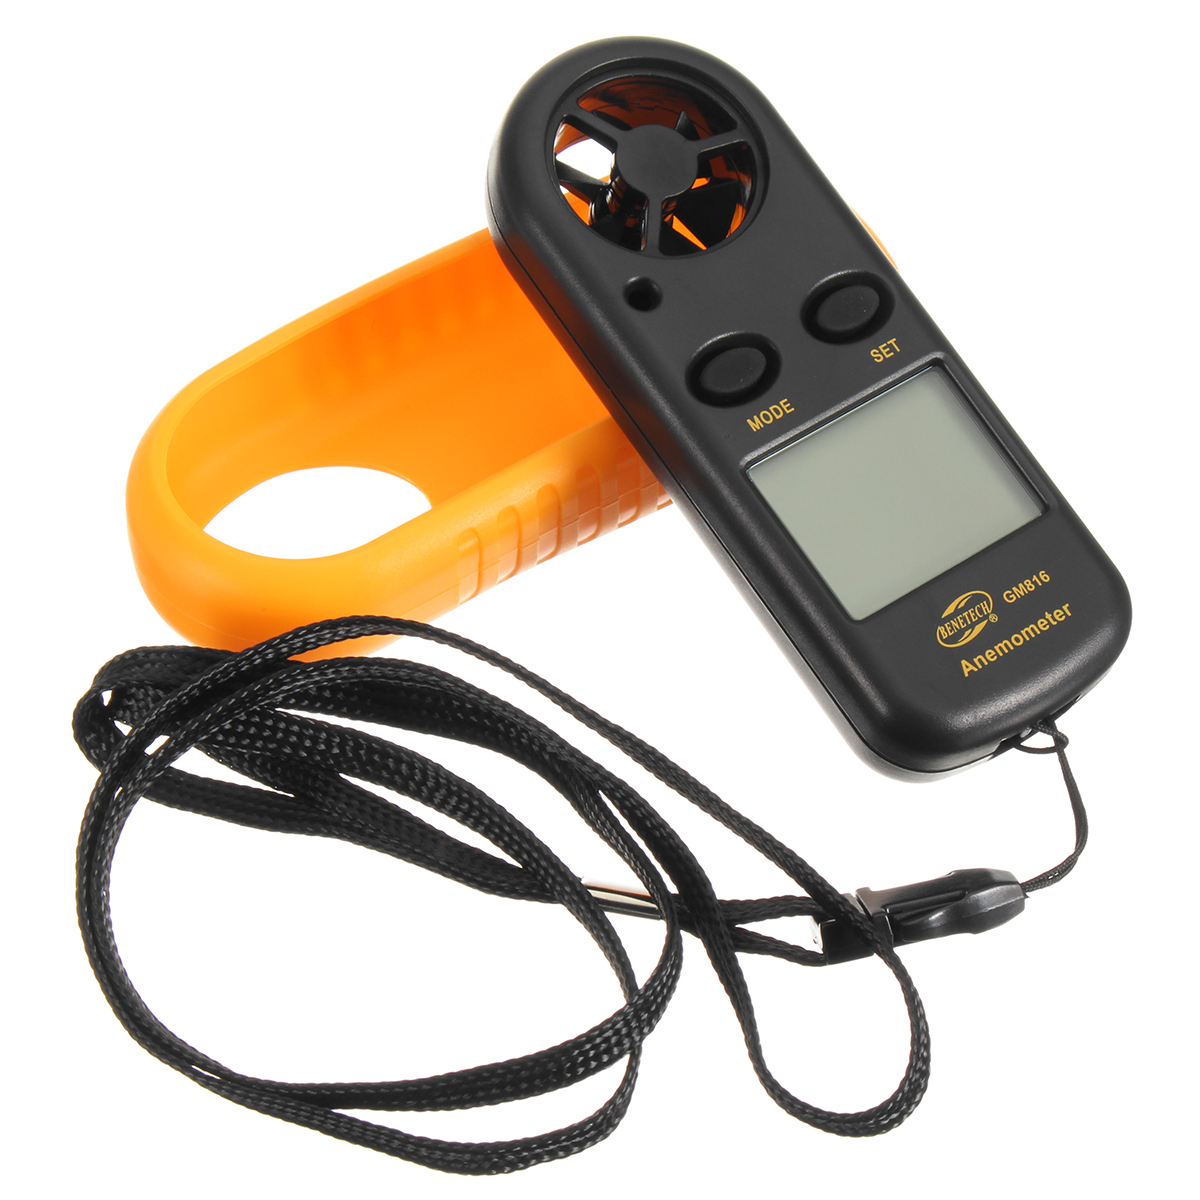 Digital-LCD-Anemometer-Thermometer-Air-Wind-Speed-Meter-Temperature-Tester-1277544-8